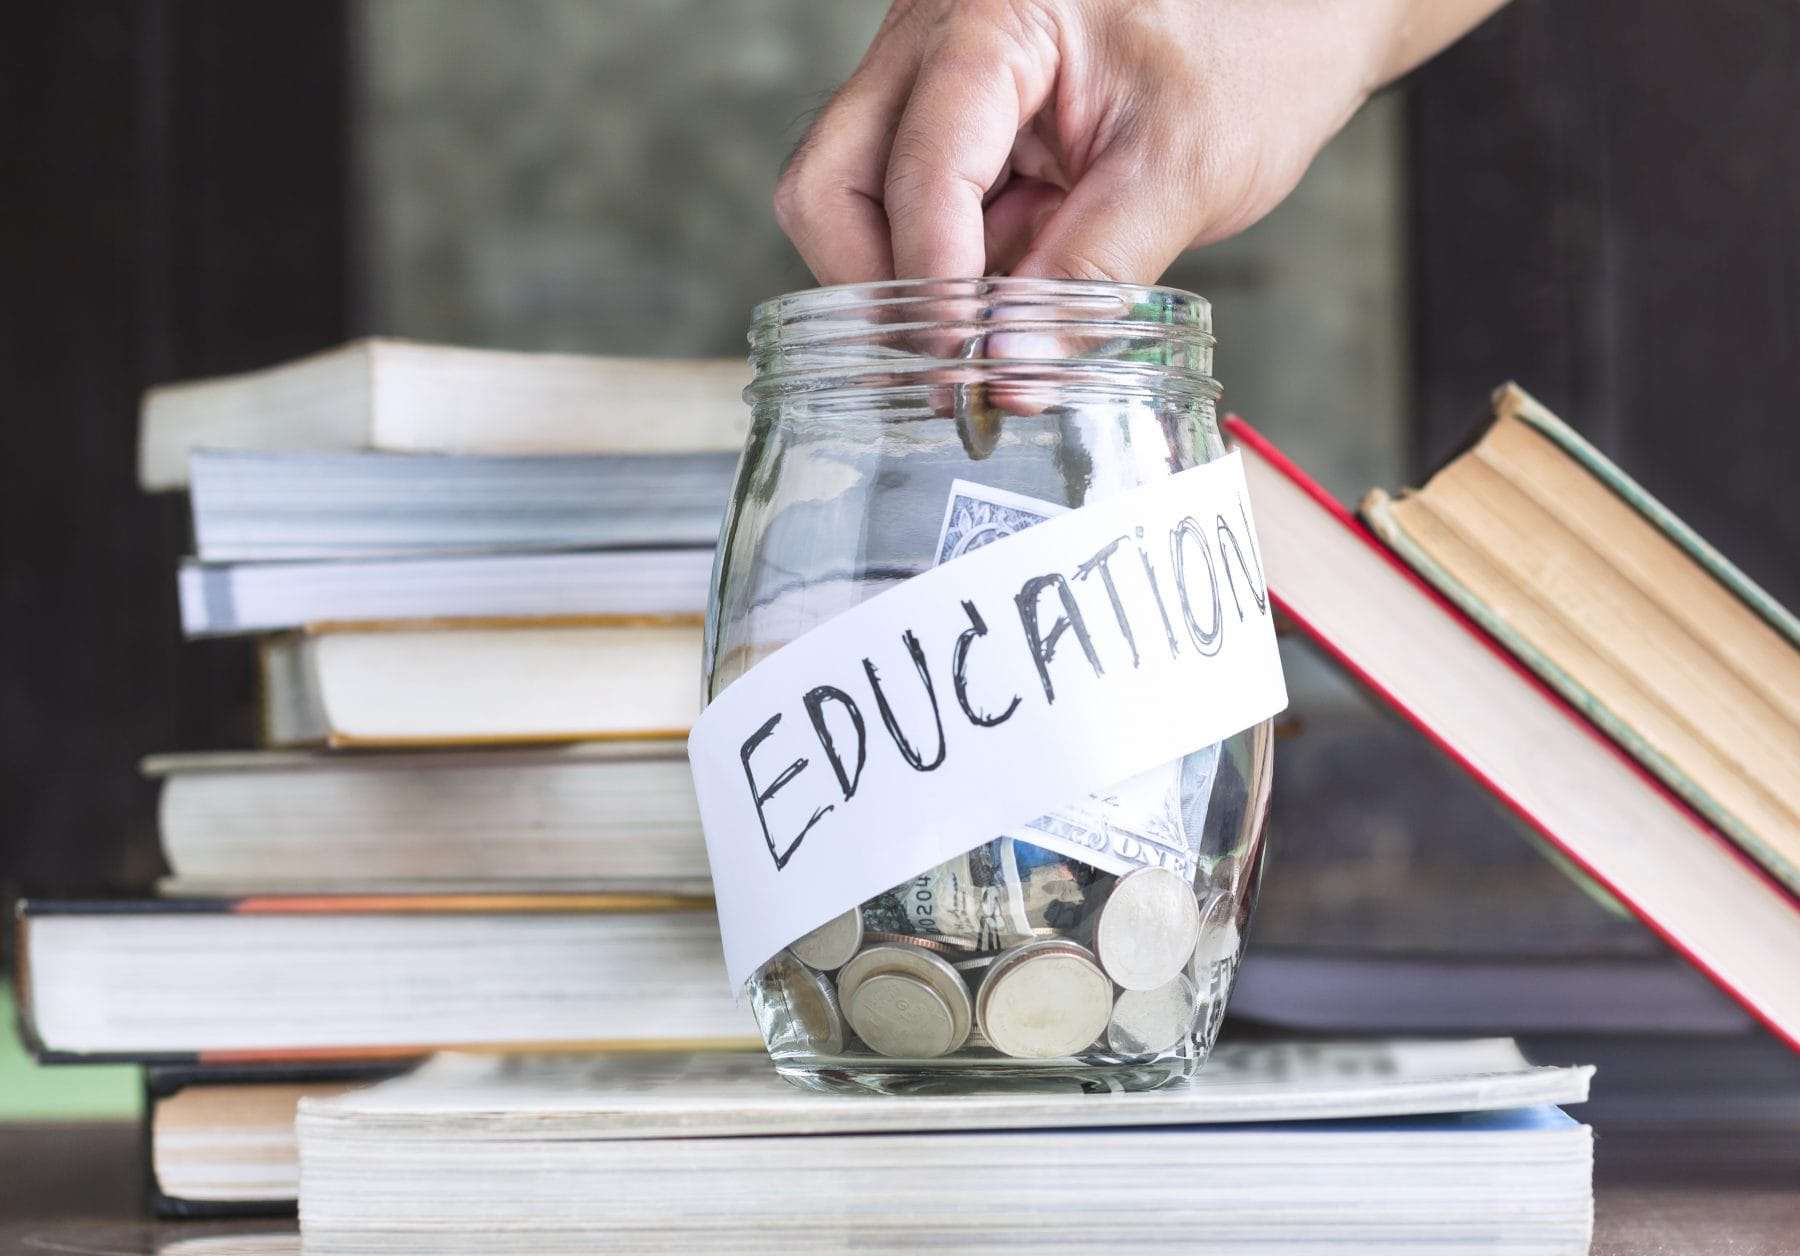 3 Considerations For College Saving